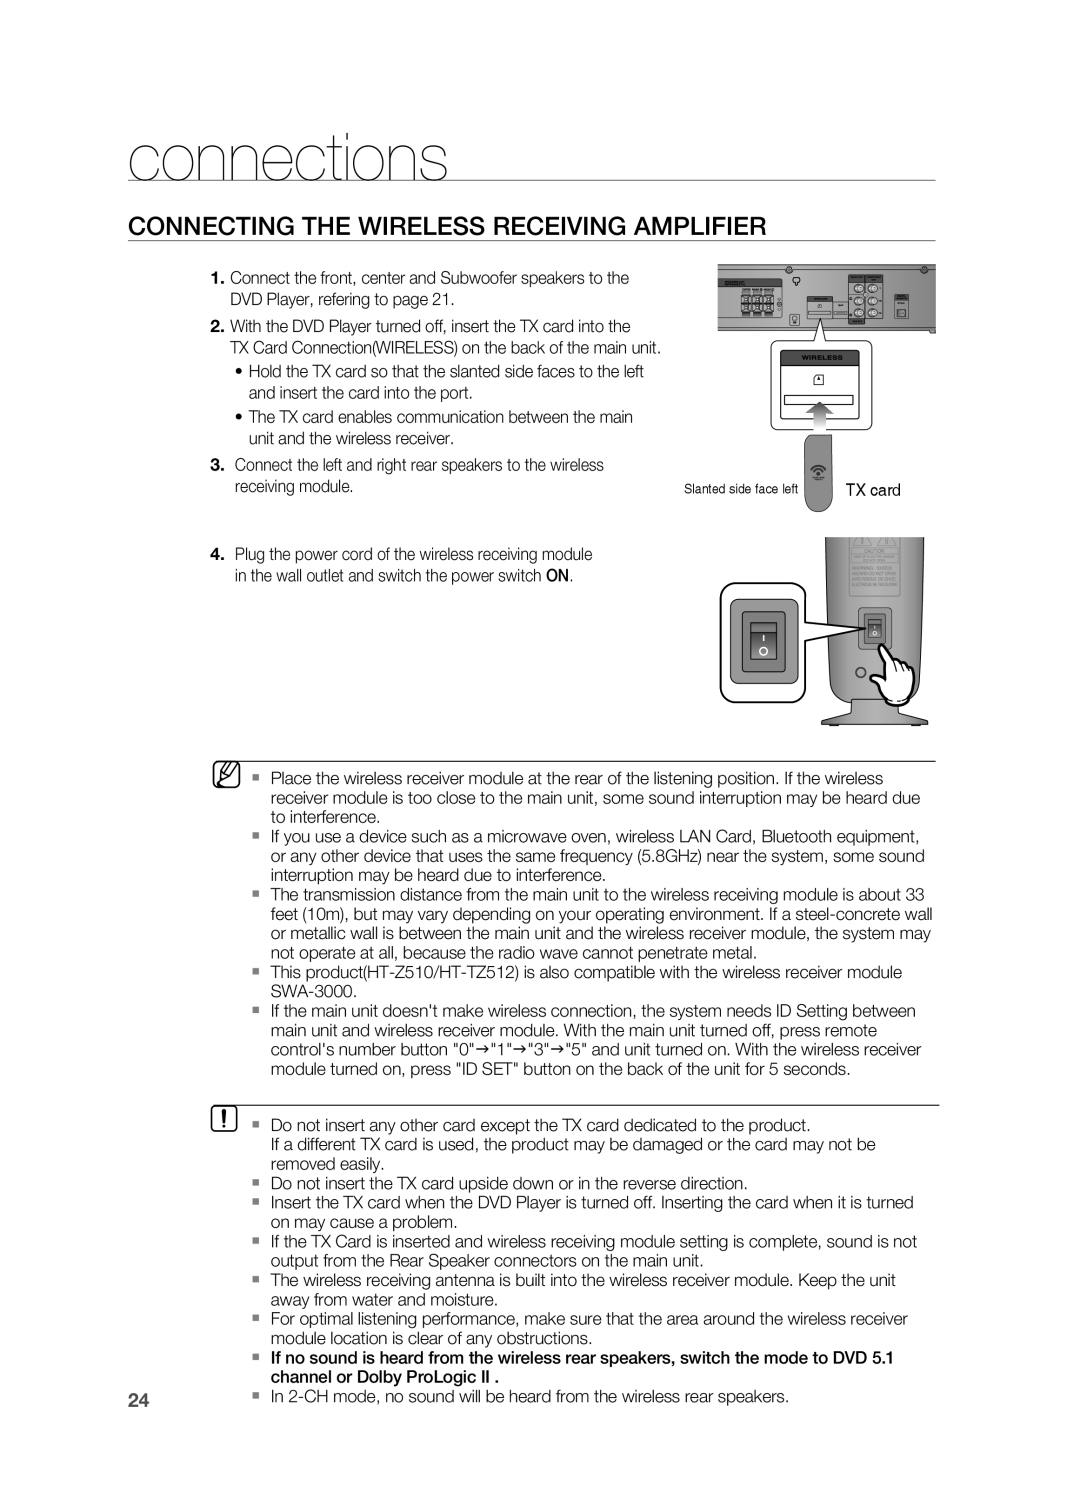 Samsung HT-Z510 manual Connecting the Wireless Receiving Amplifier, connections 